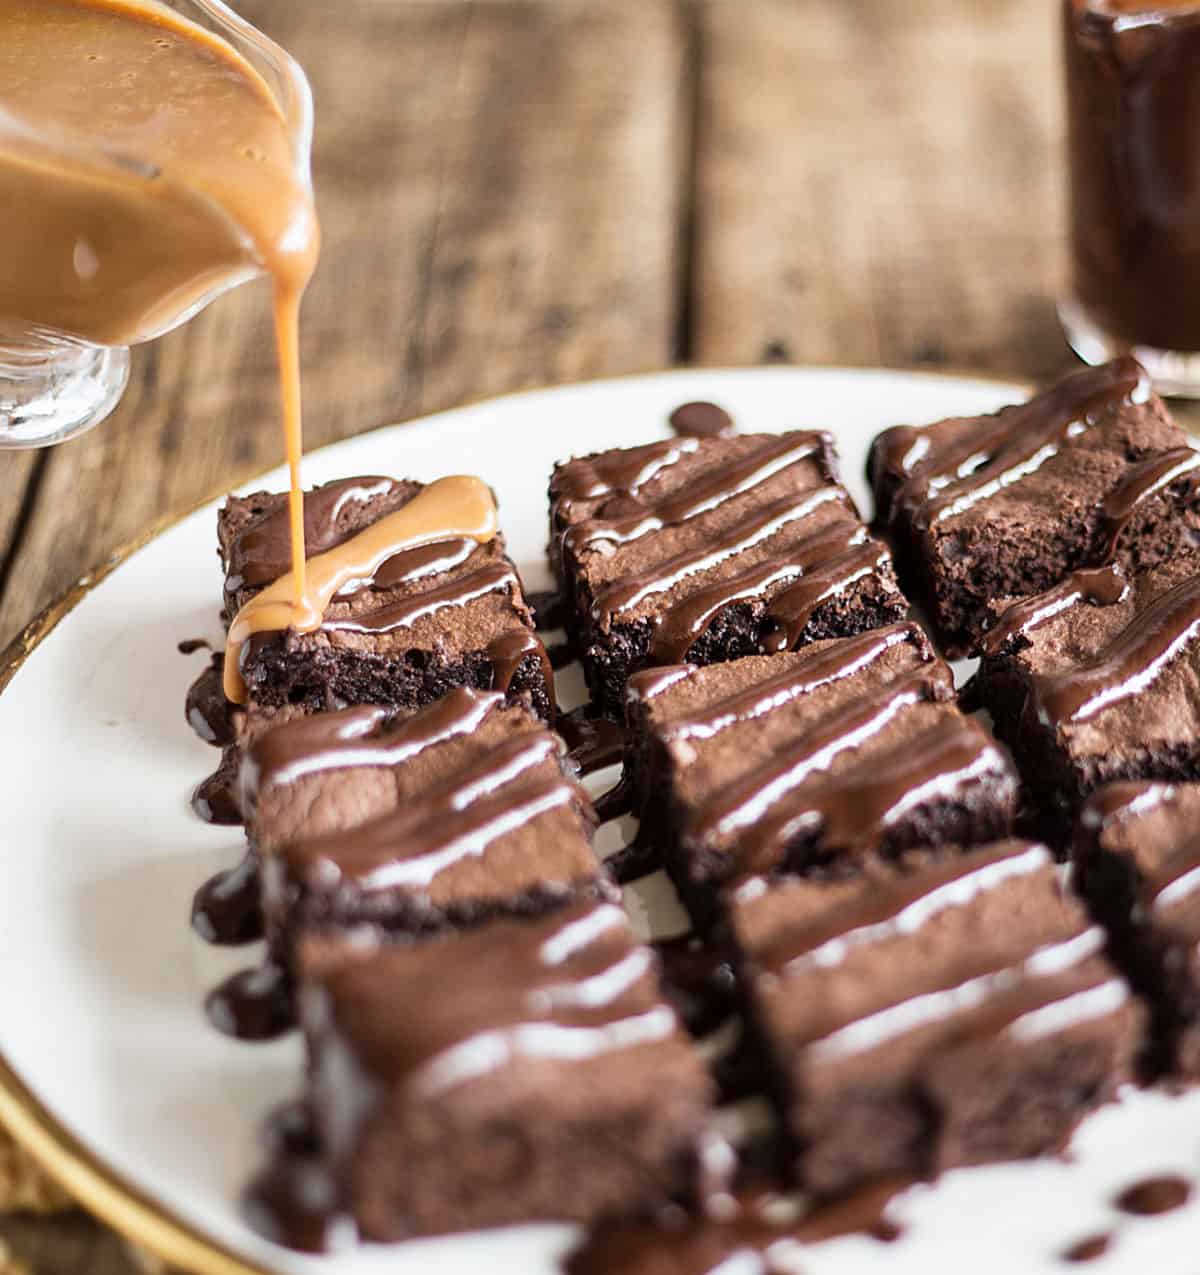 Pouring dulce de leche sauce from jar onto brownie squares with chocolate sauce on white plate